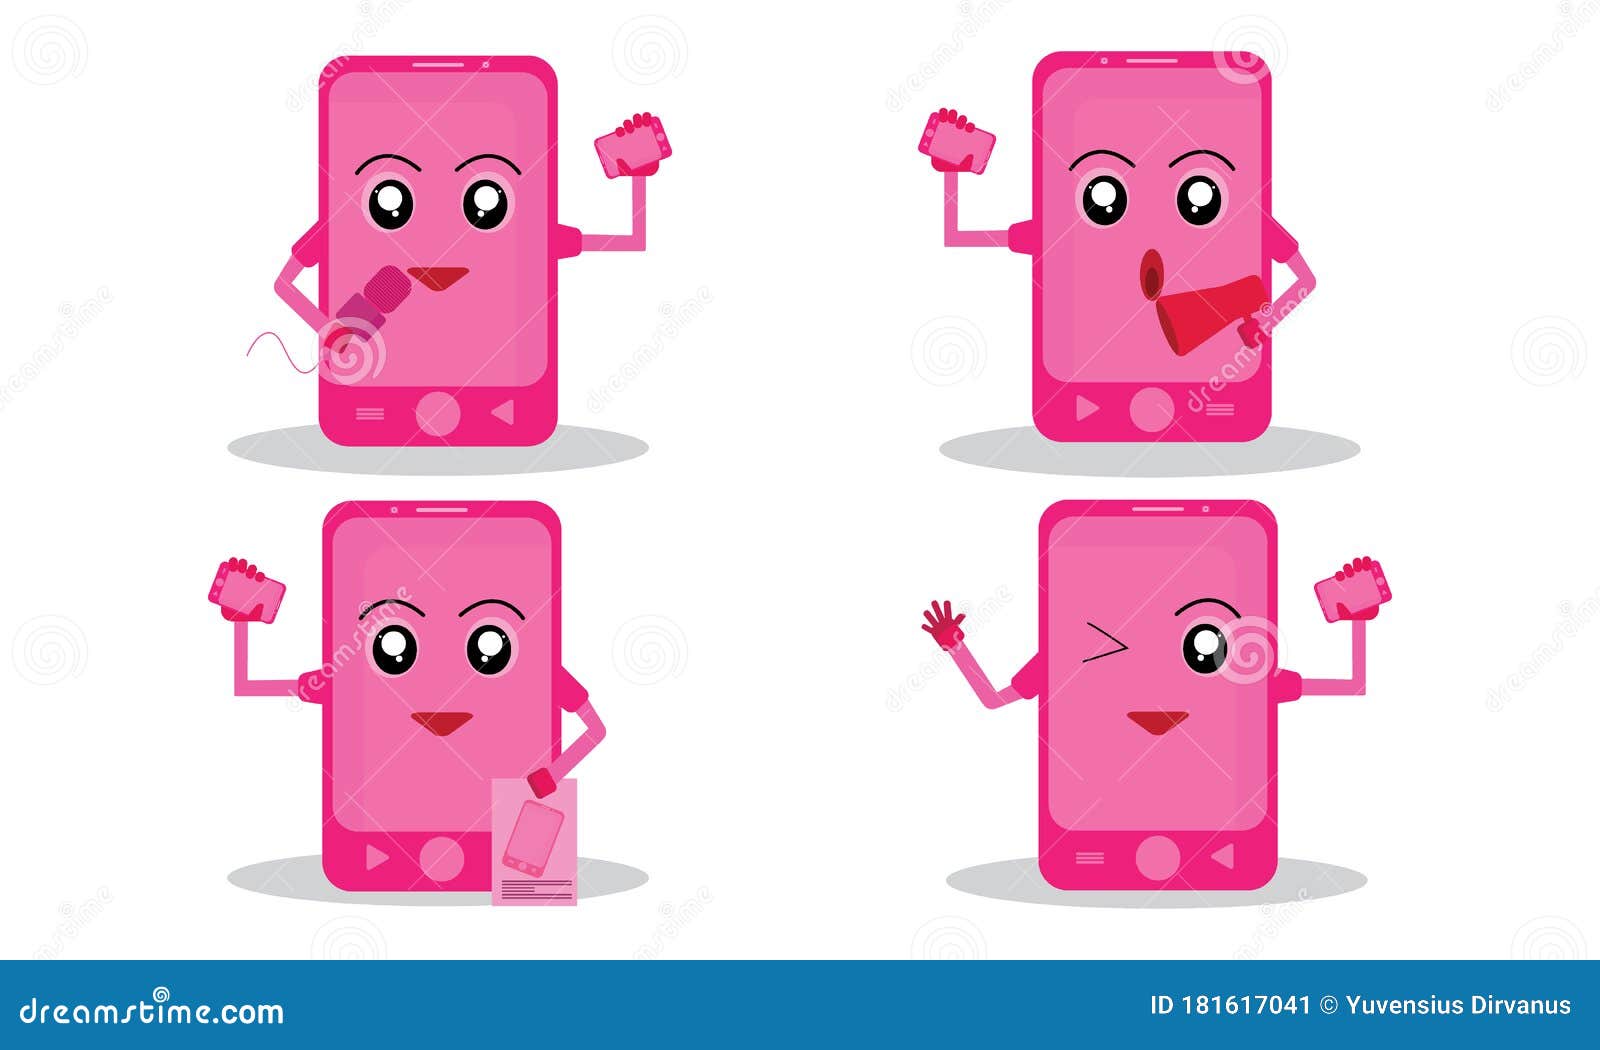 Cute And Pretty Pink Handphone Set Stock Vector Illustration Of Promotions Vectors